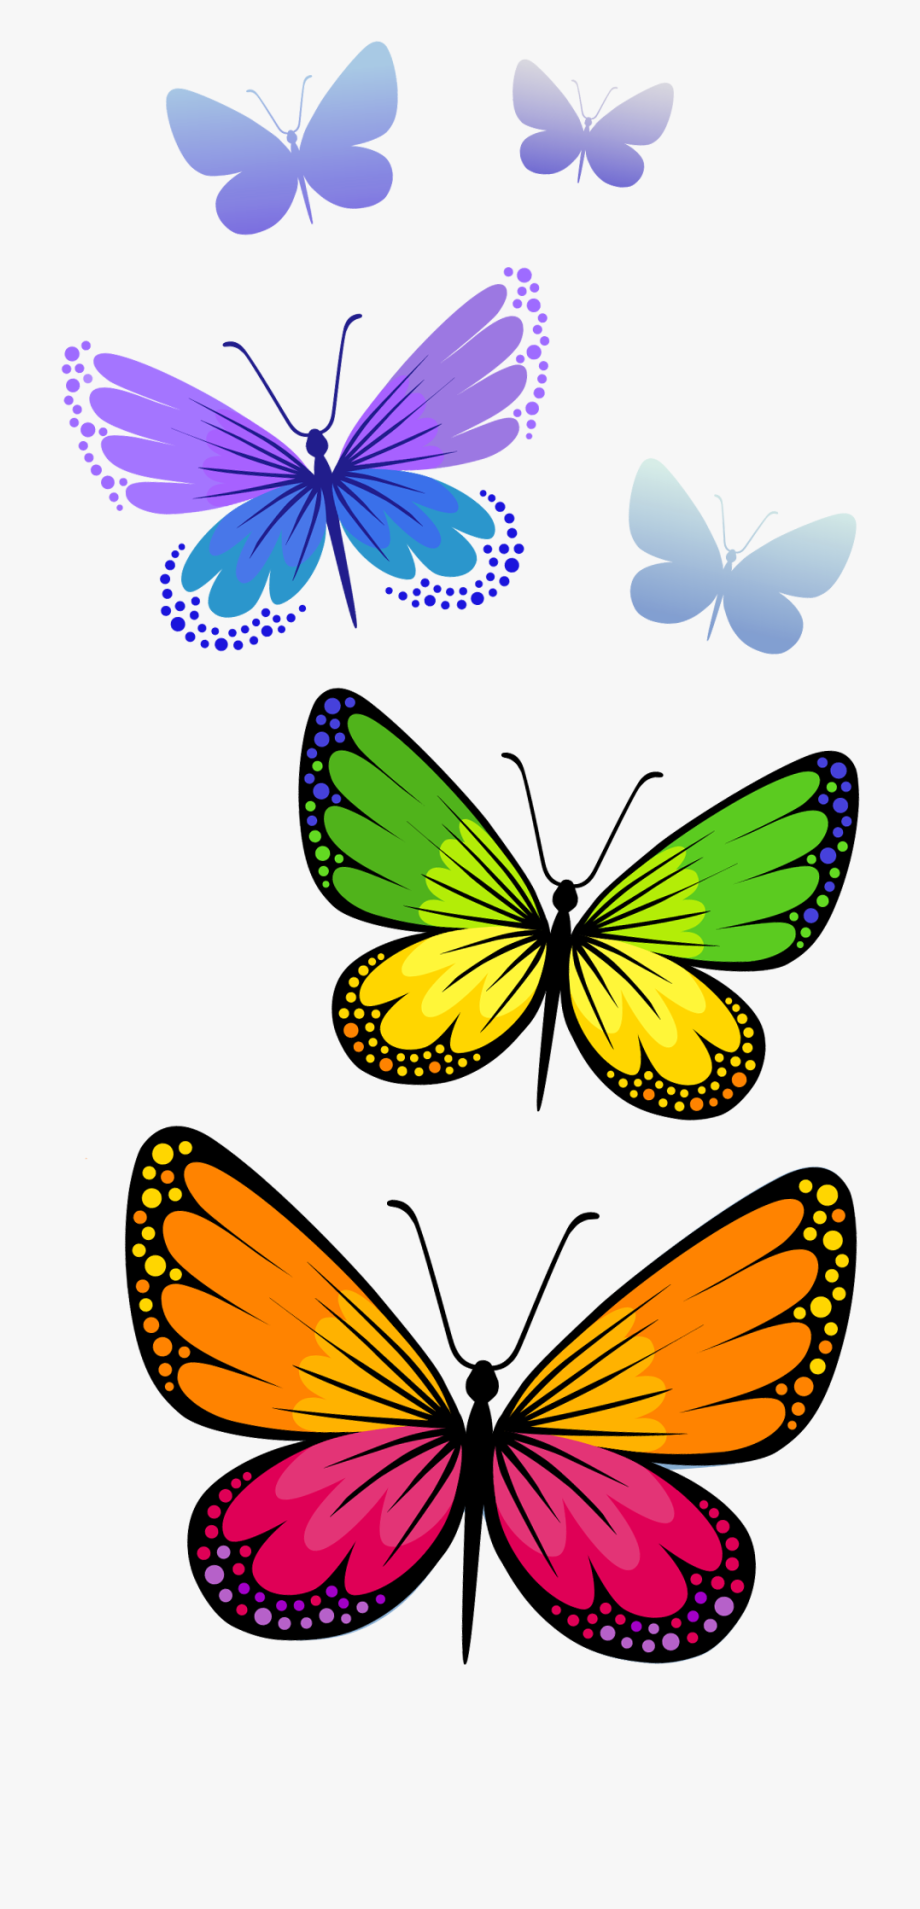 Half butterfly cliparts.